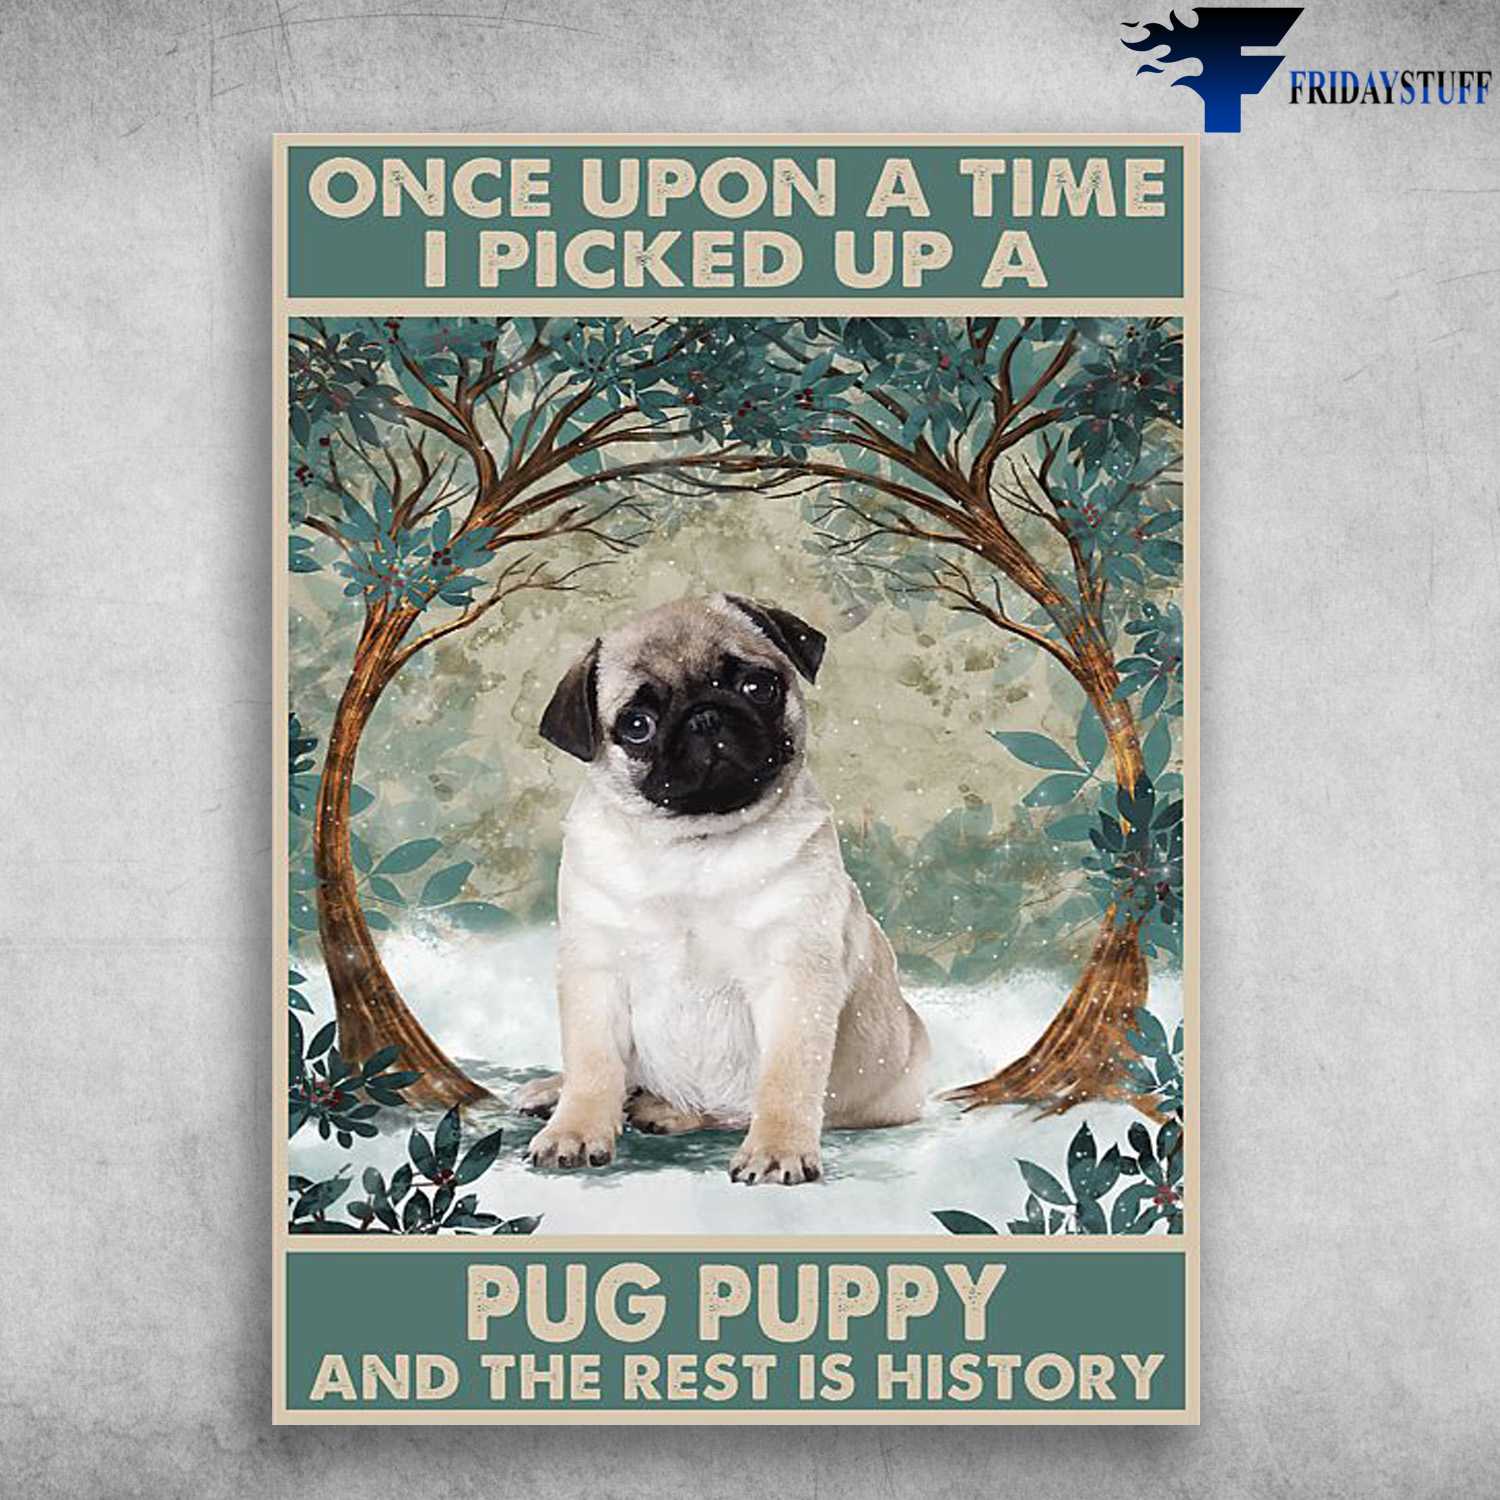 Pug Dog - One Upon A Time, There Was A Pug Puppy, And The Rest Is History